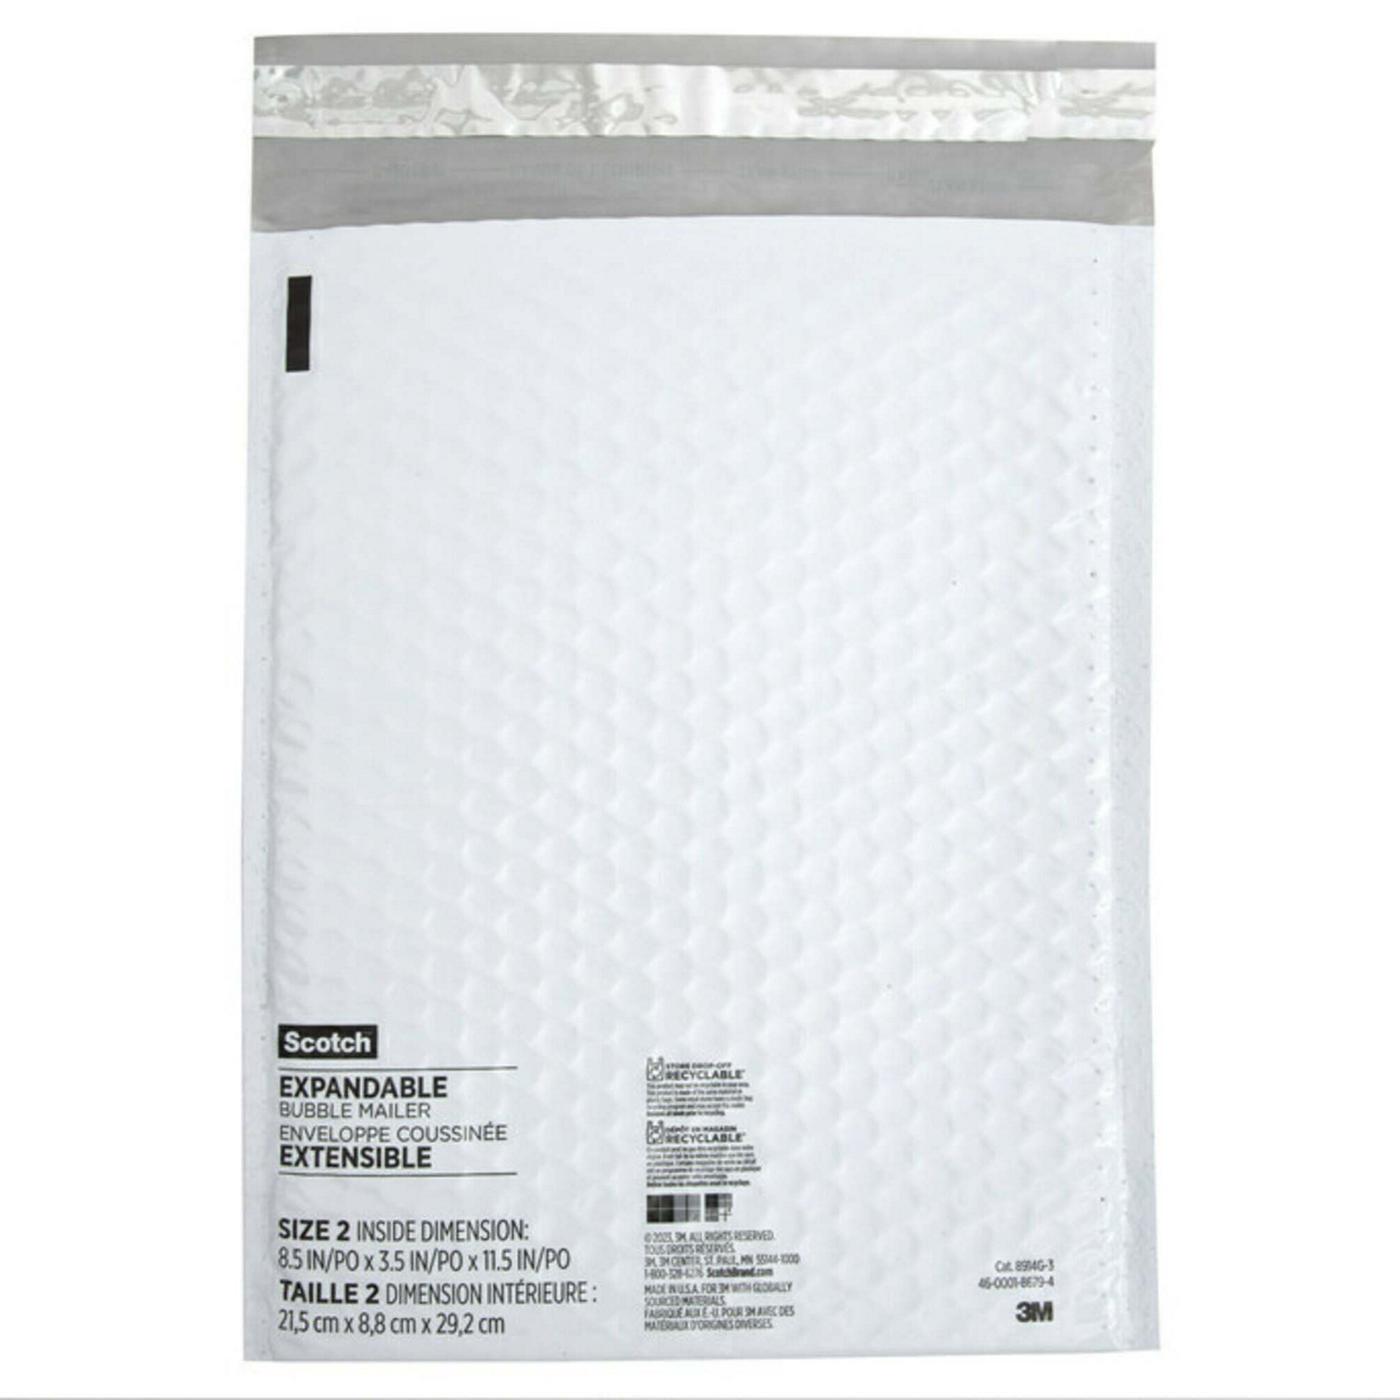 Scotch Expandable Bubble Mailers, 3 Ct; image 2 of 3